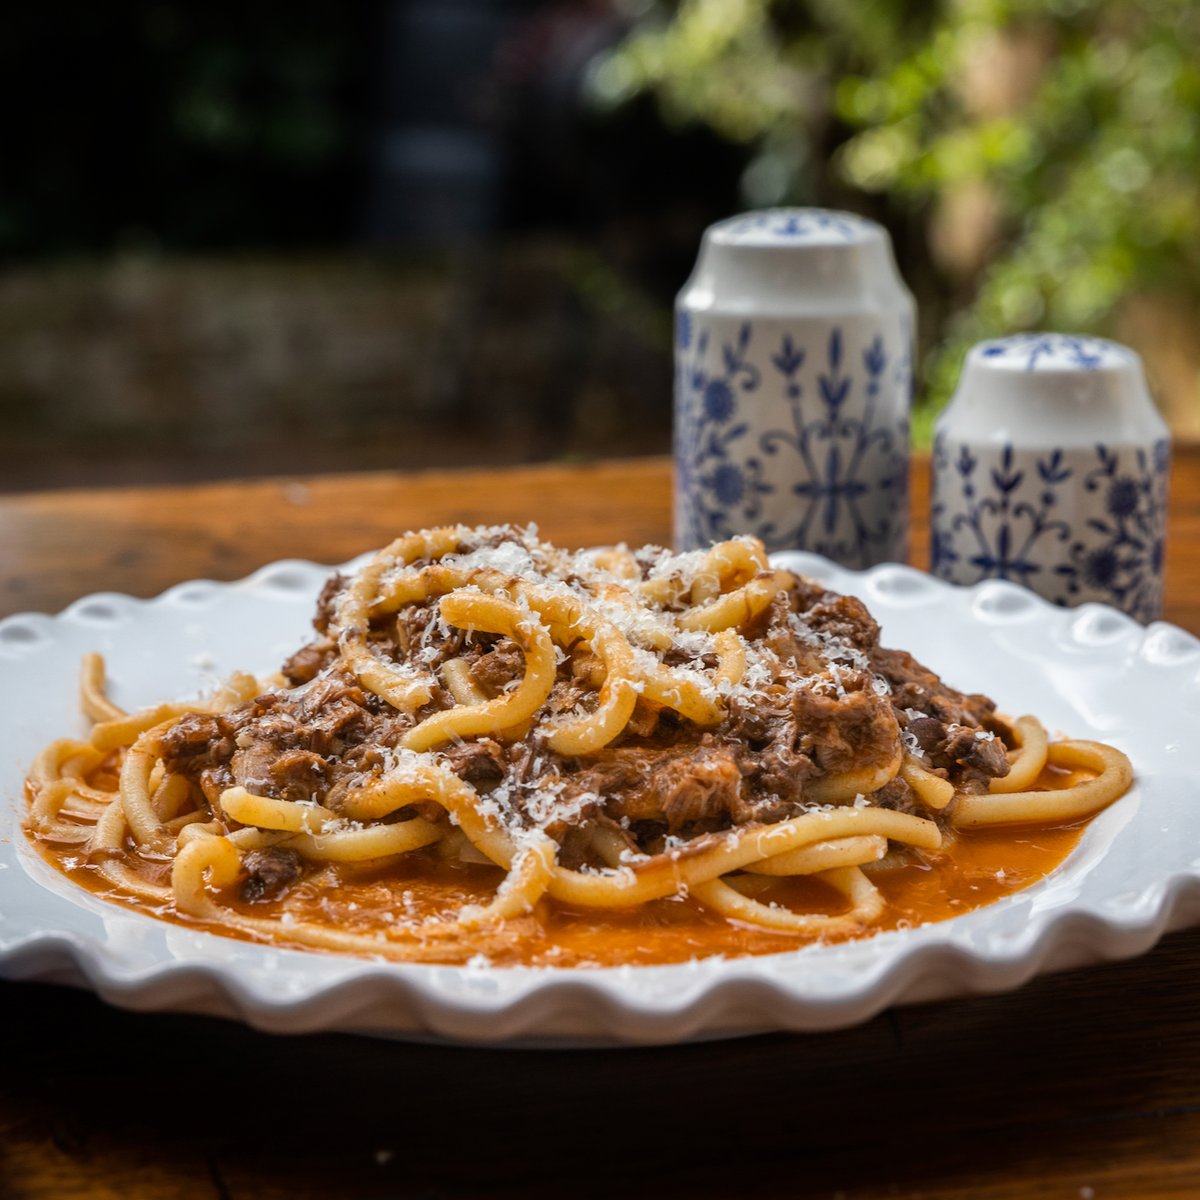 Bucatini with stracotto beef & oyster mushrooms